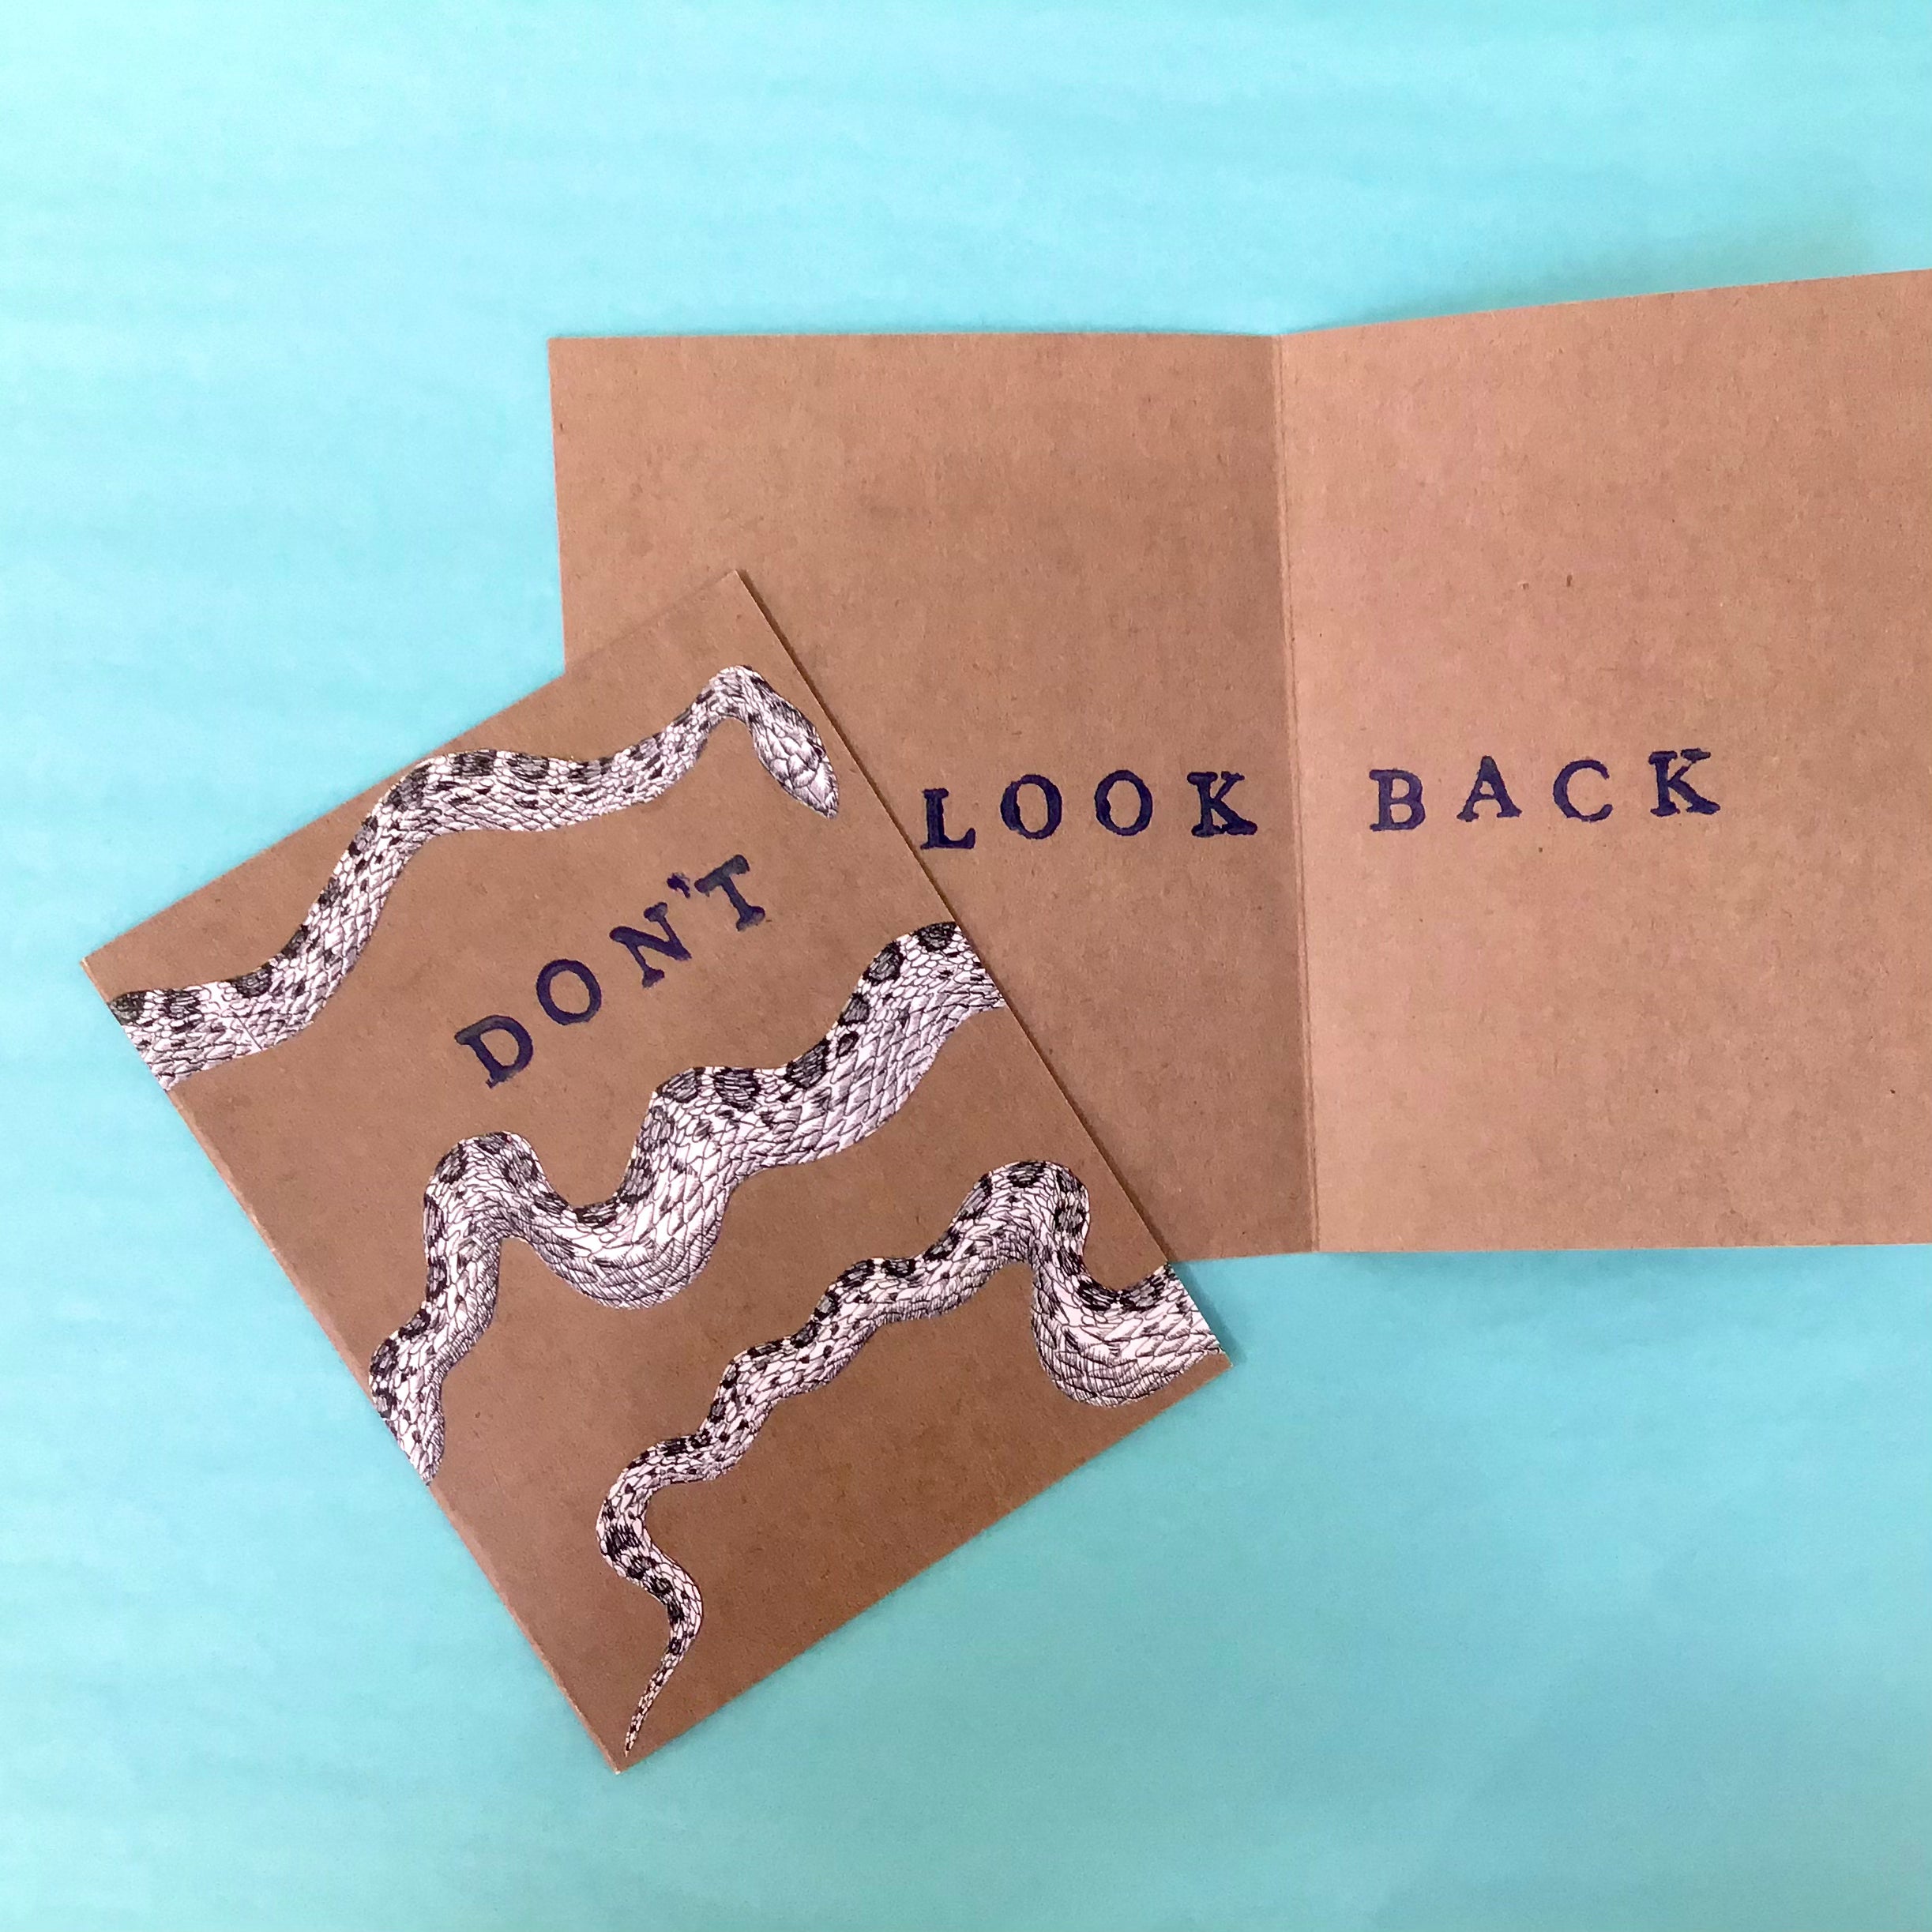 Don't look back Greeting Card with a snake